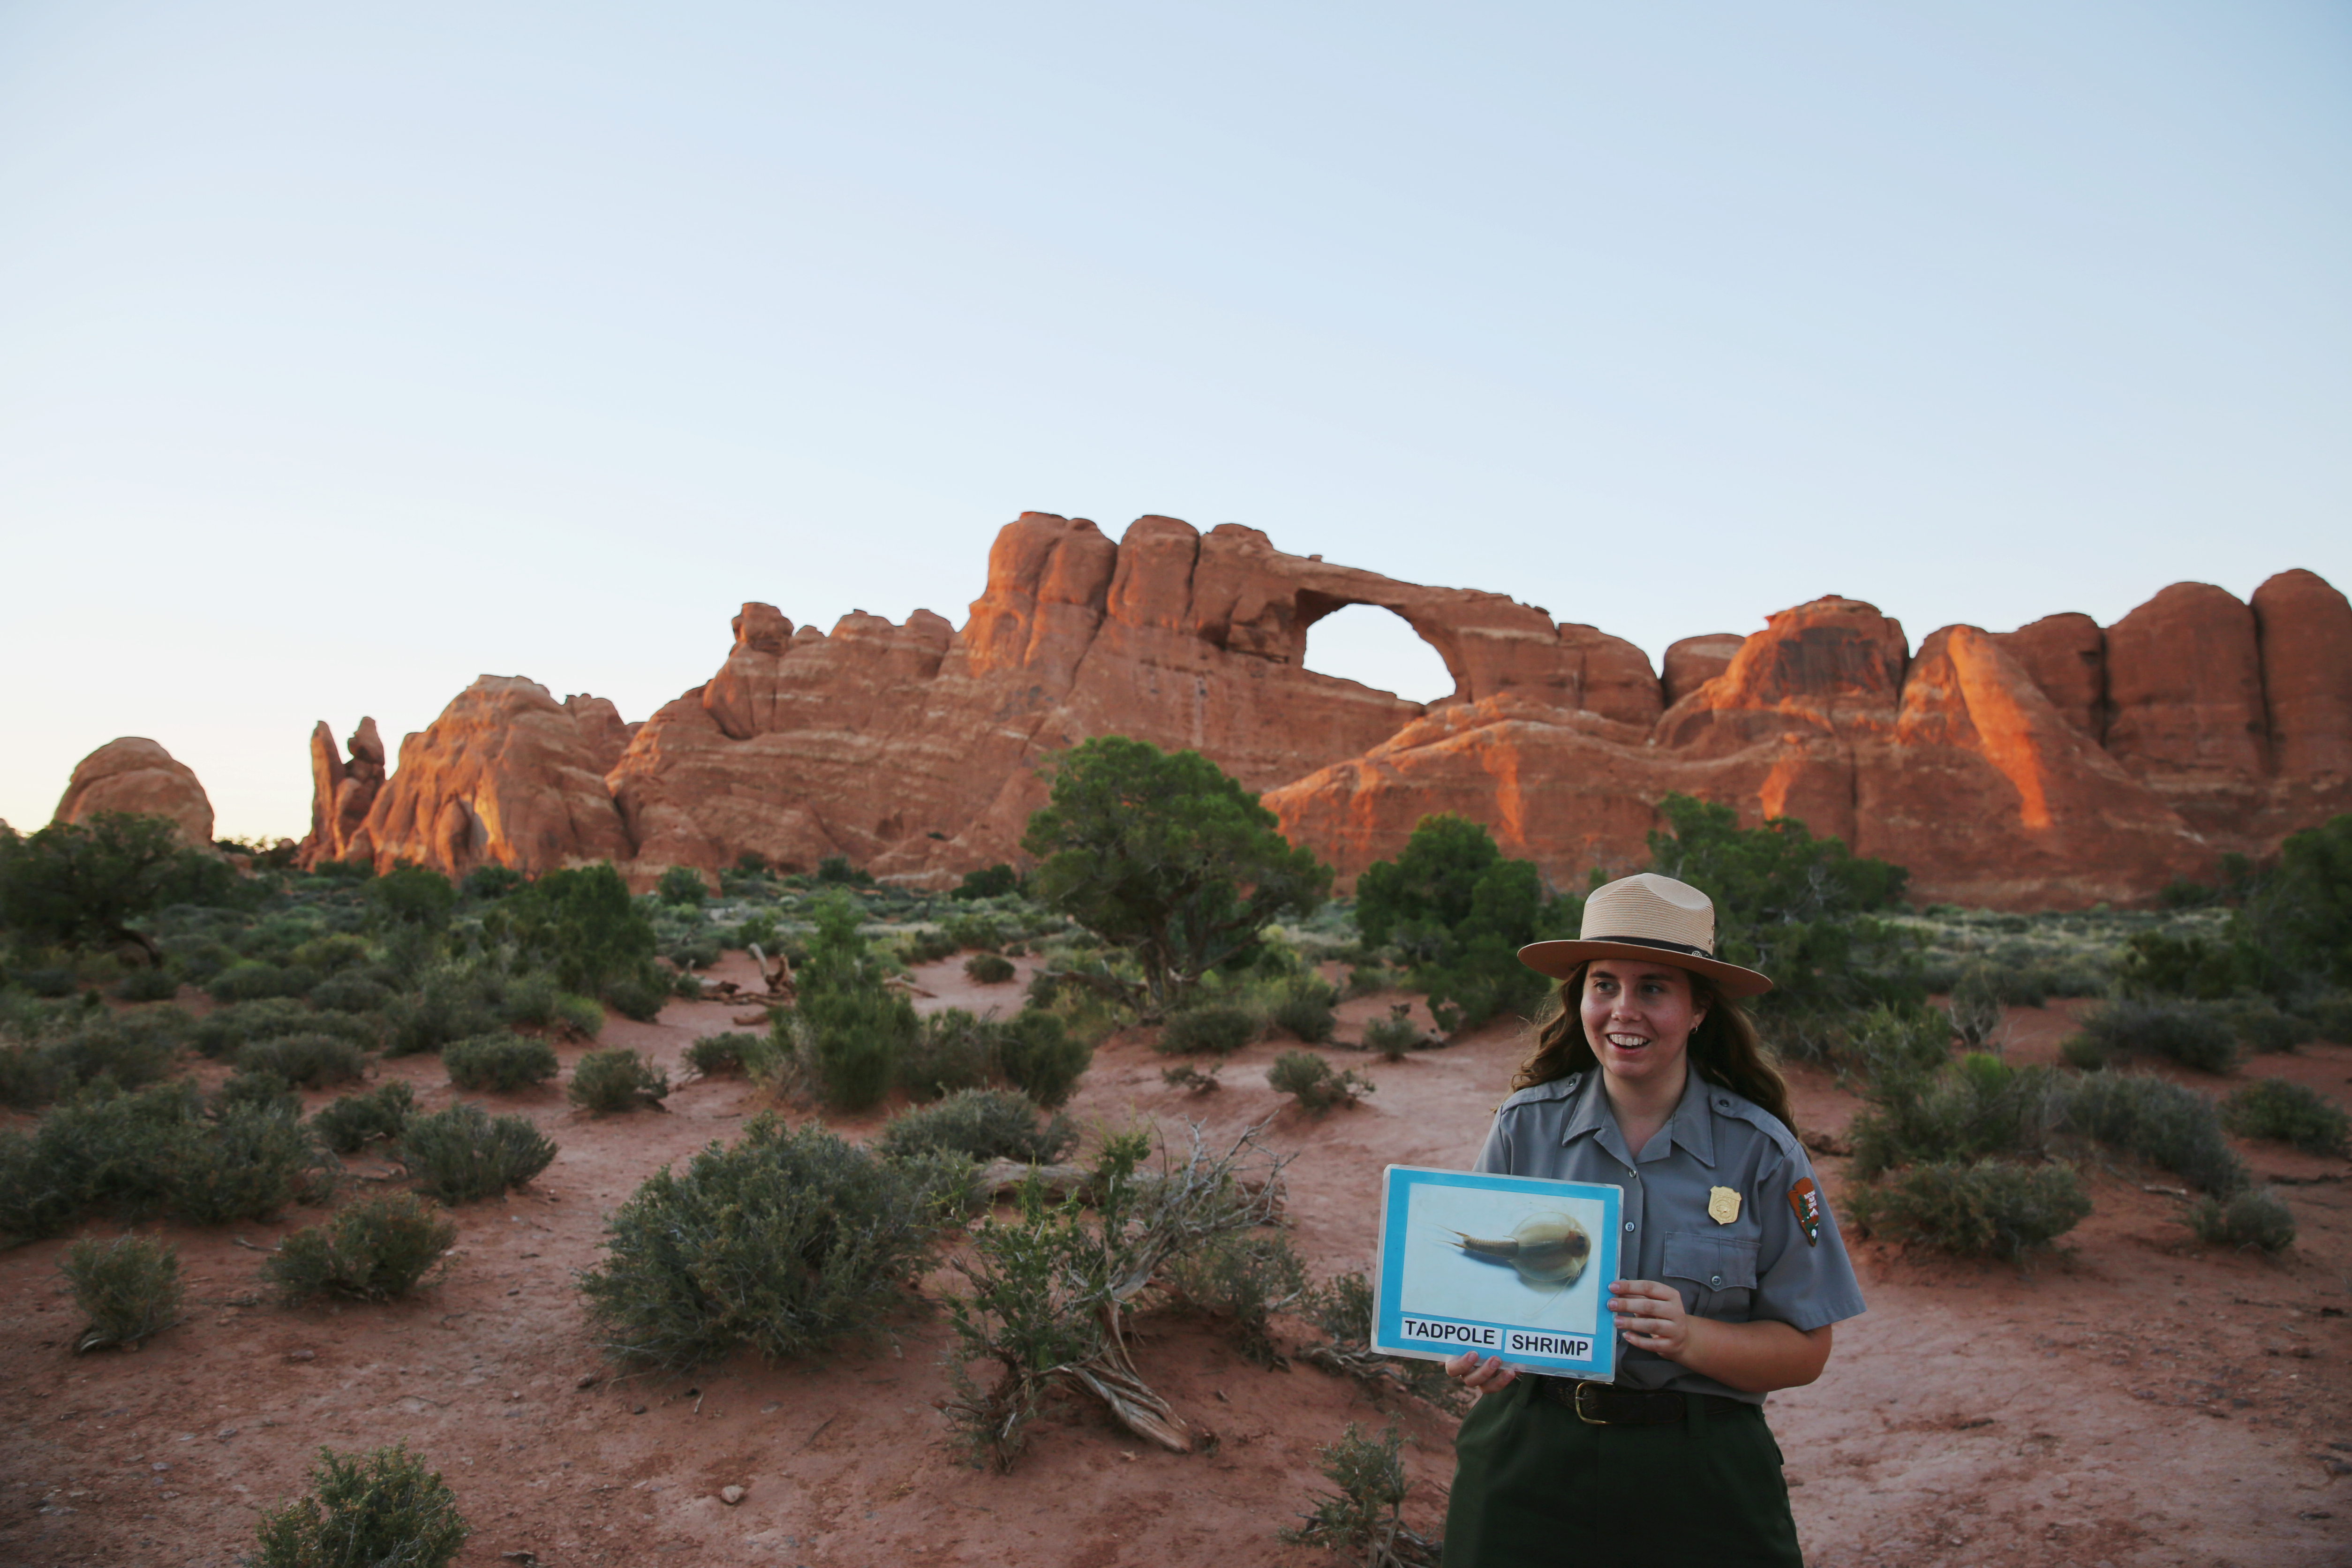 Courtesy photo from Kristin Vinduska): Kristin Vinduska speaks to visitors at Arches National Park during an internship. She is now employed as a park ranger with the National Park Service.